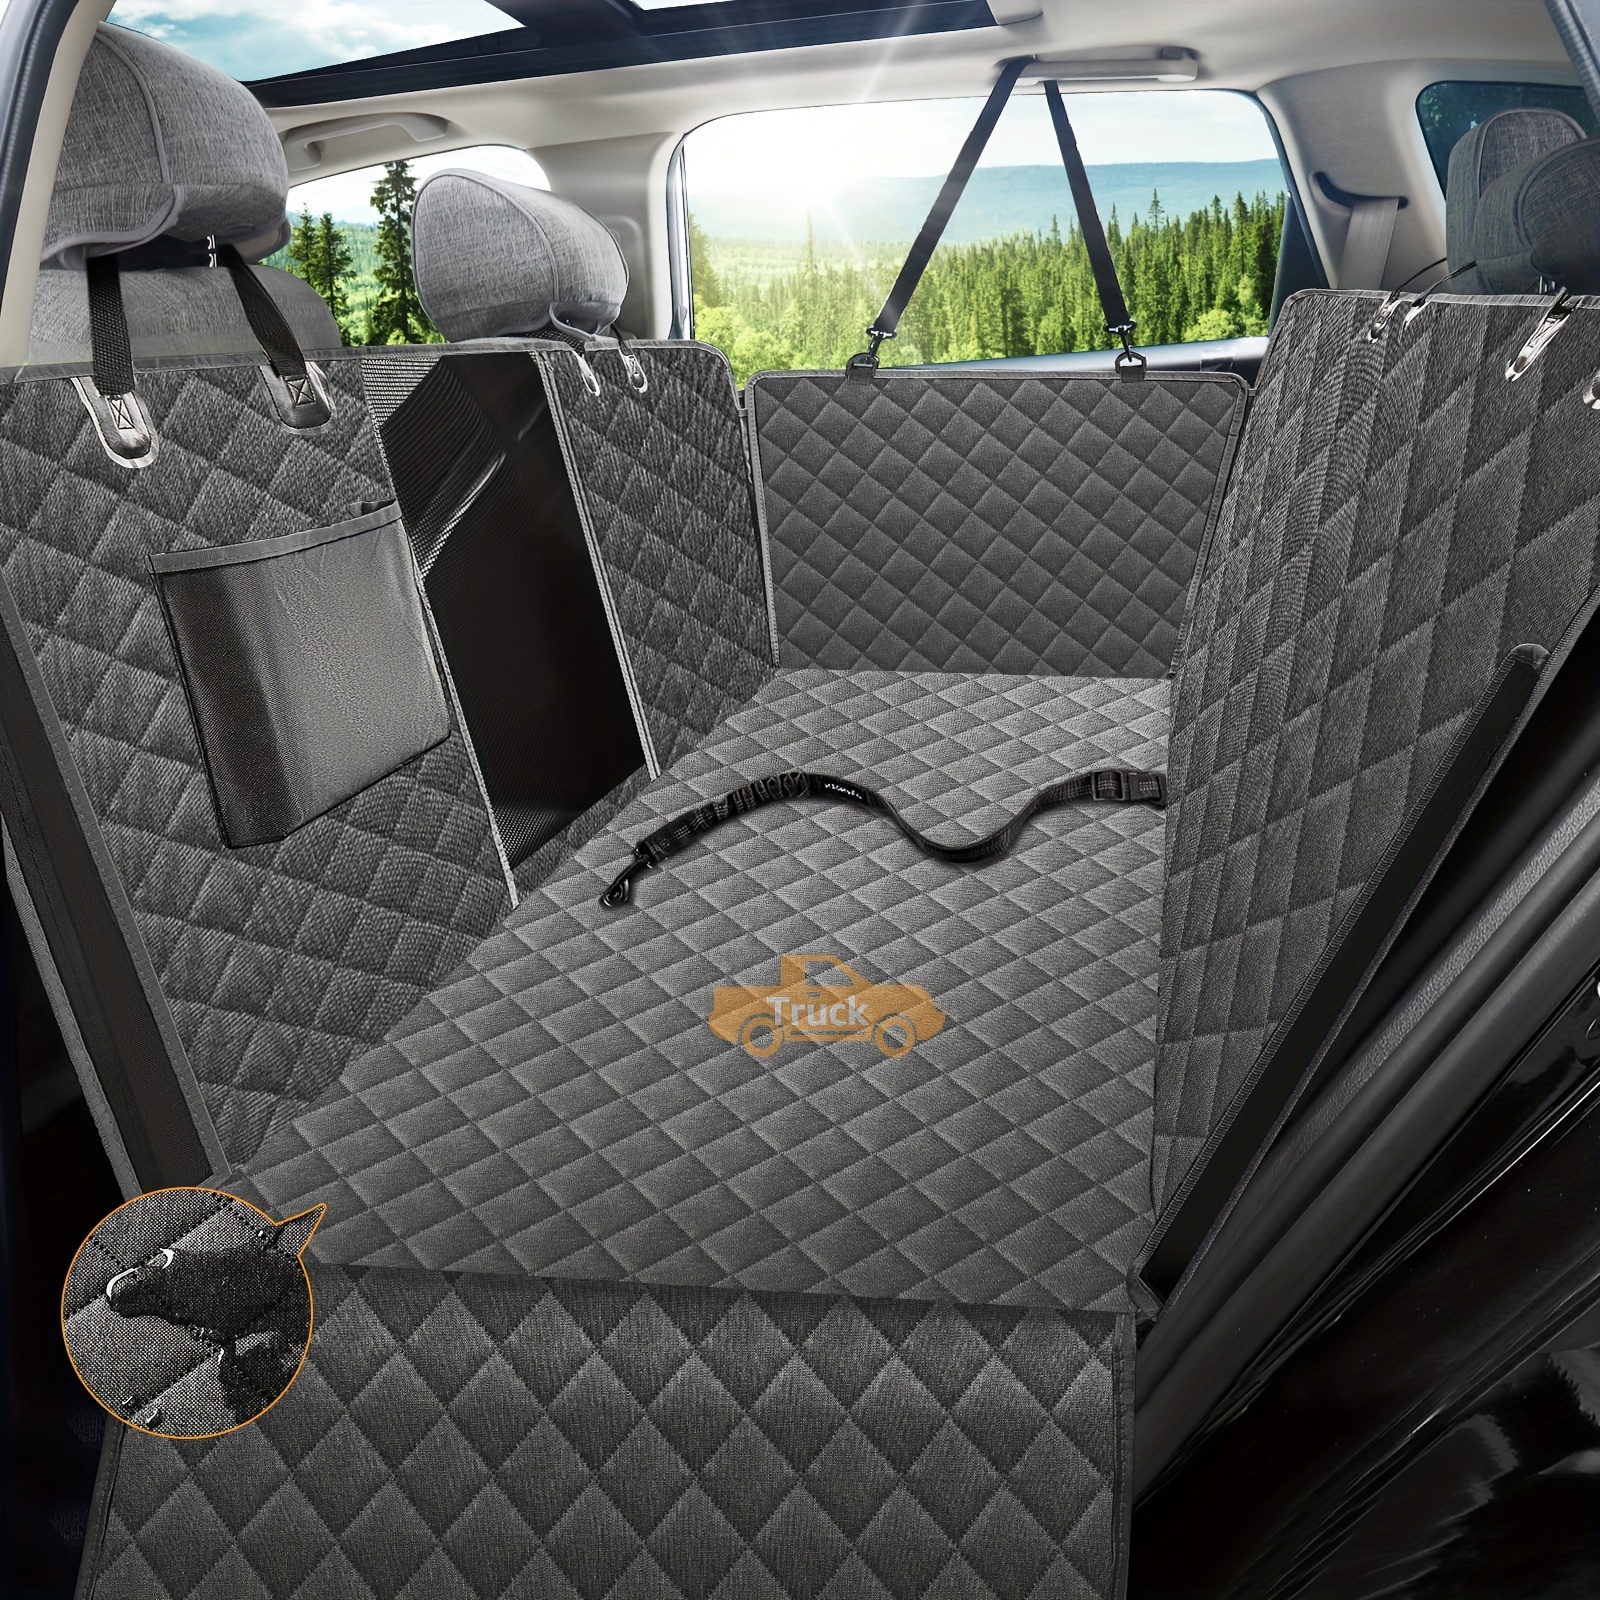 

Dog Back Seat Covers For Trucks, 100% Waterproof With Big Mesh Window, Xl Nonslip Scratchproof Dog Truck Hammock, Heavy Duty Seat Covers For Full Sized Pickup Trucks F150 (gray)